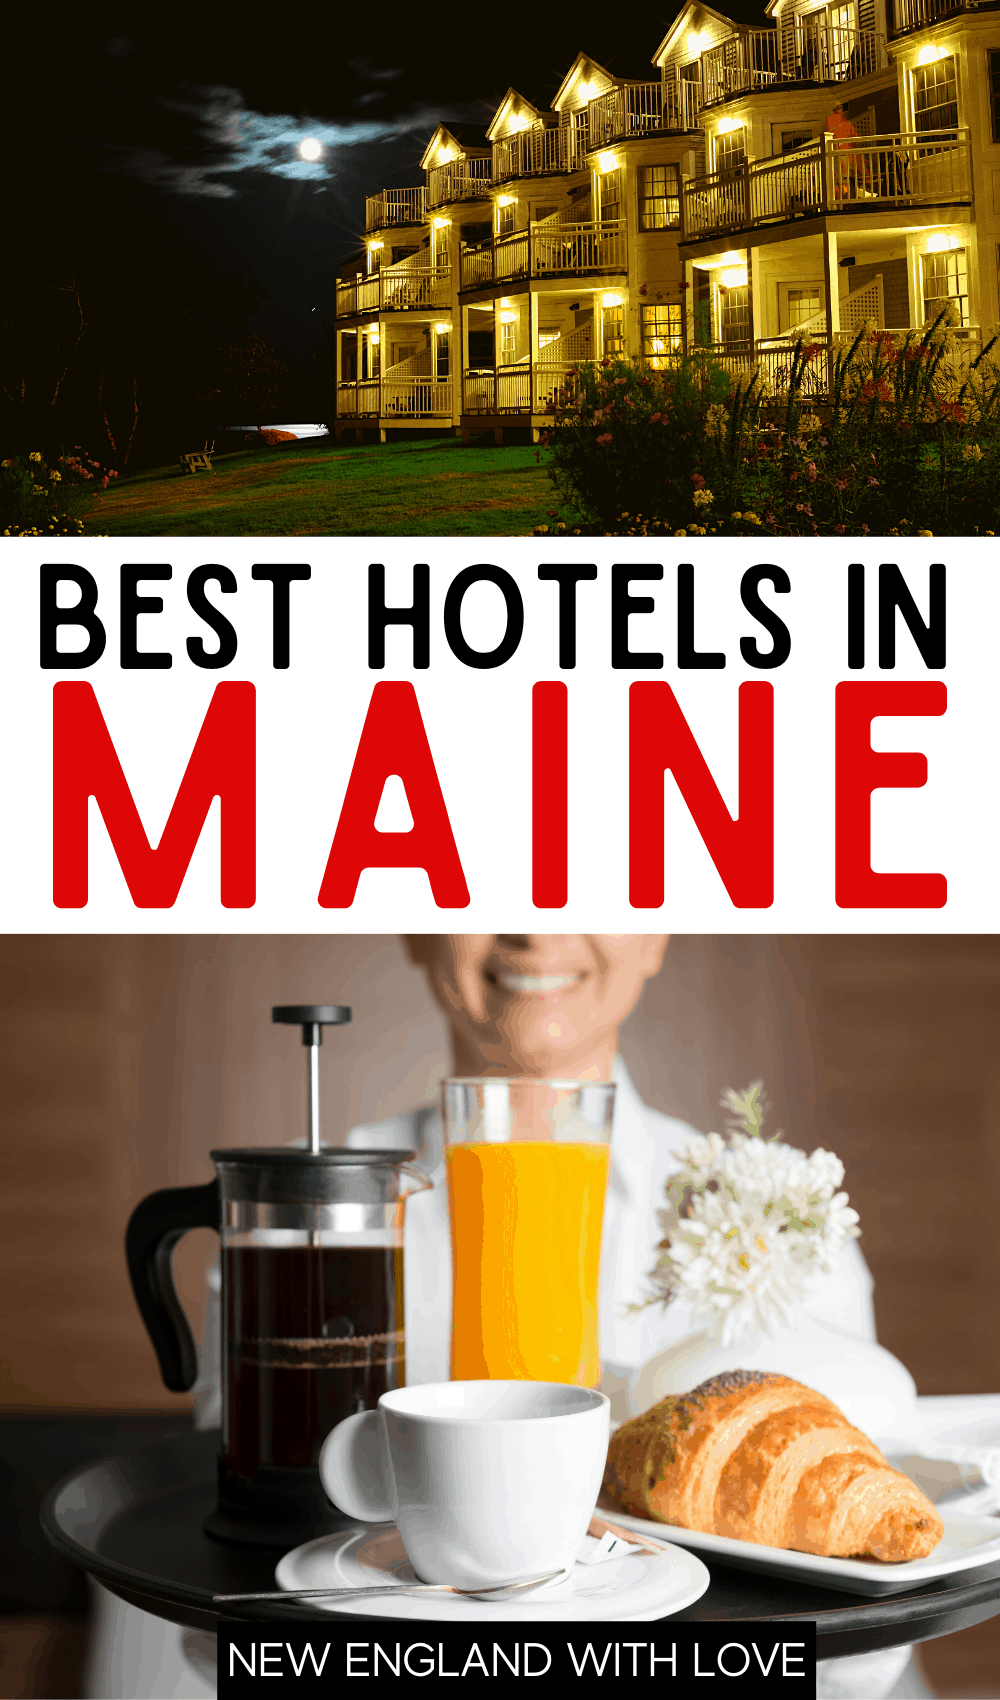 Pinterest graphic reading "BEST HOTELS IN MAINE"